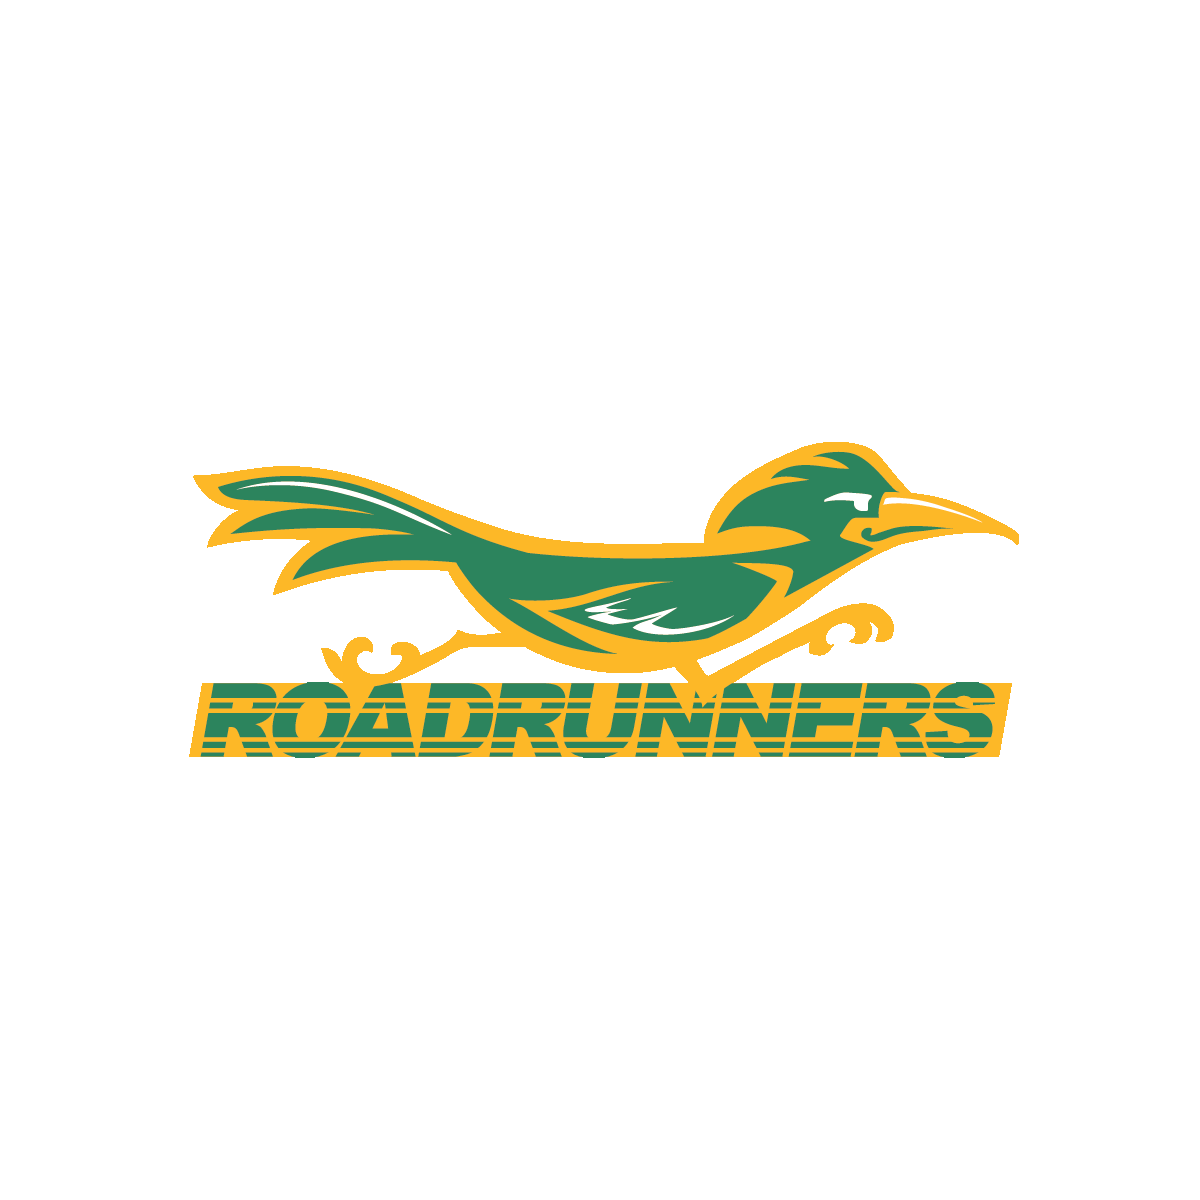 Athletics mascot with the word "Roadrunners" - color